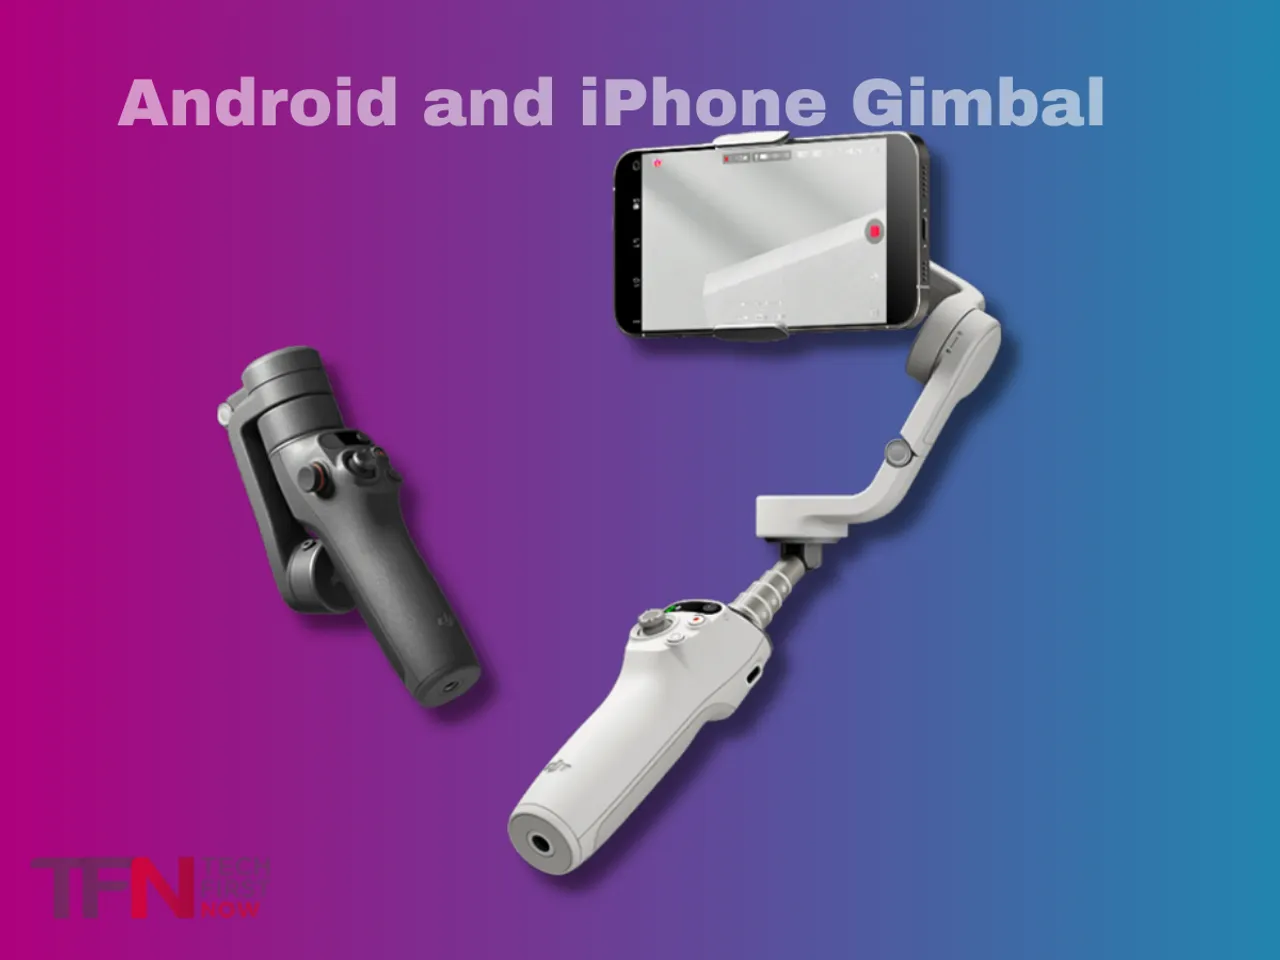 Best Android and iPhone Gimbal